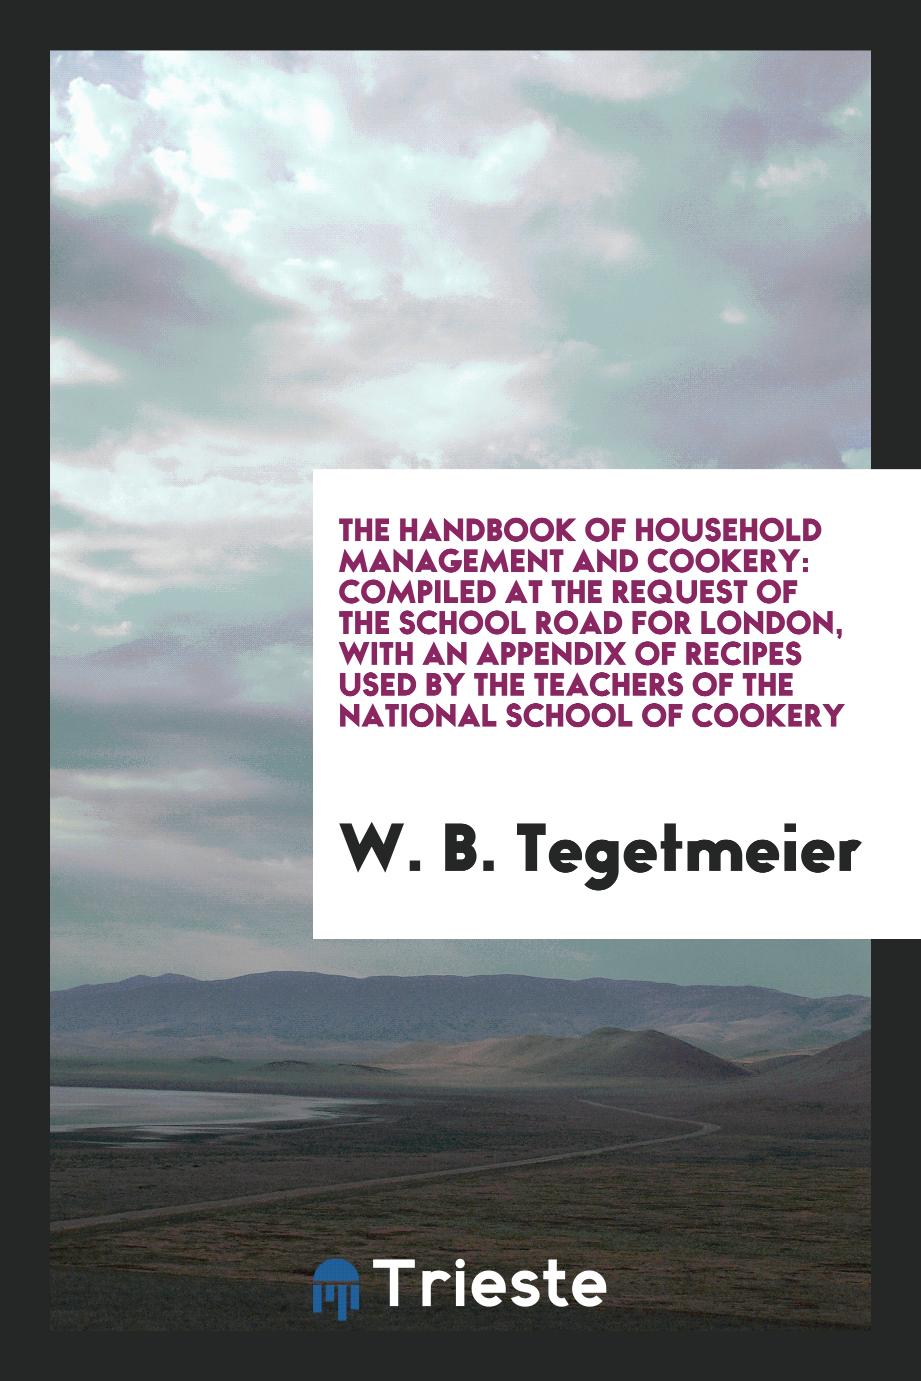 The Handbook of Household Management and Cookery: Compiled at the Request of the School Road for London, with an Appendix of Recipes Used by the Teachers of the National School of Cookery